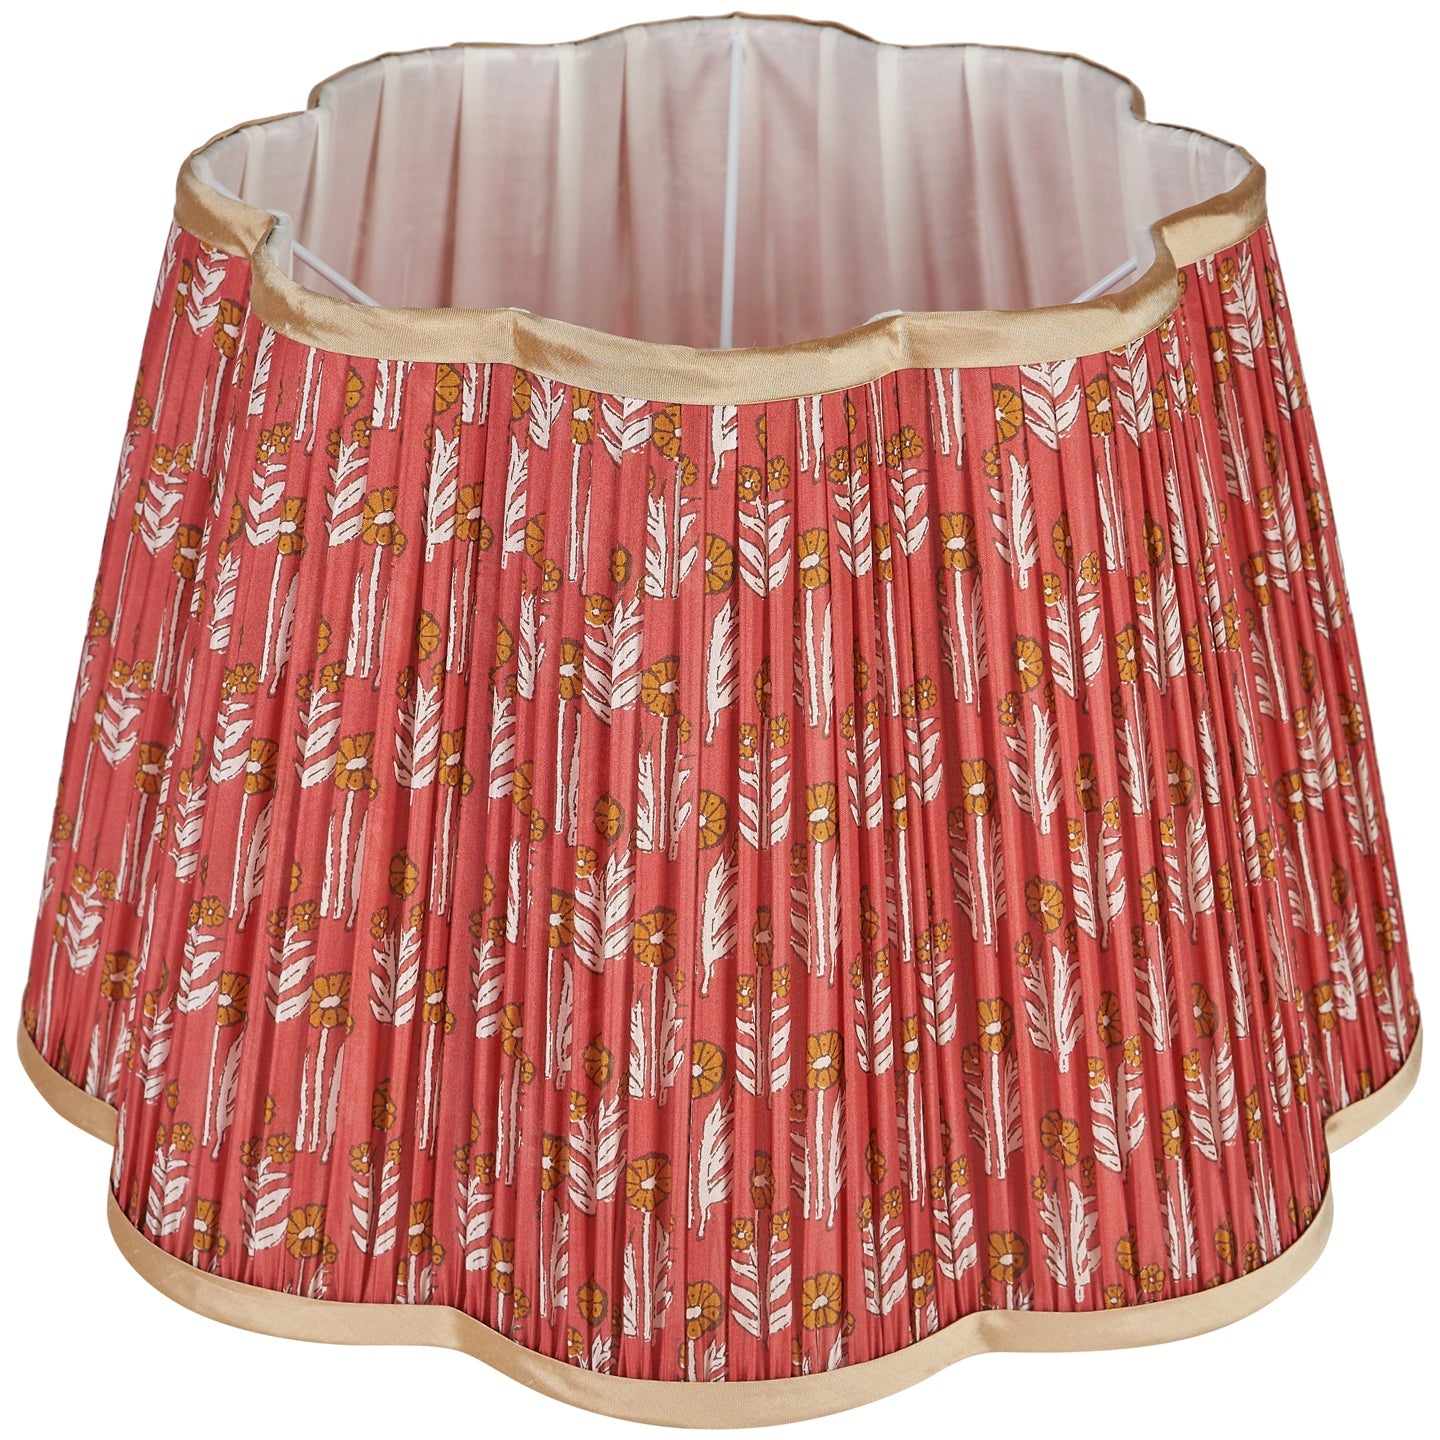 Cinnamon on Red Marigold Pleated Silk Scalloped Lampshade with Gold Trim